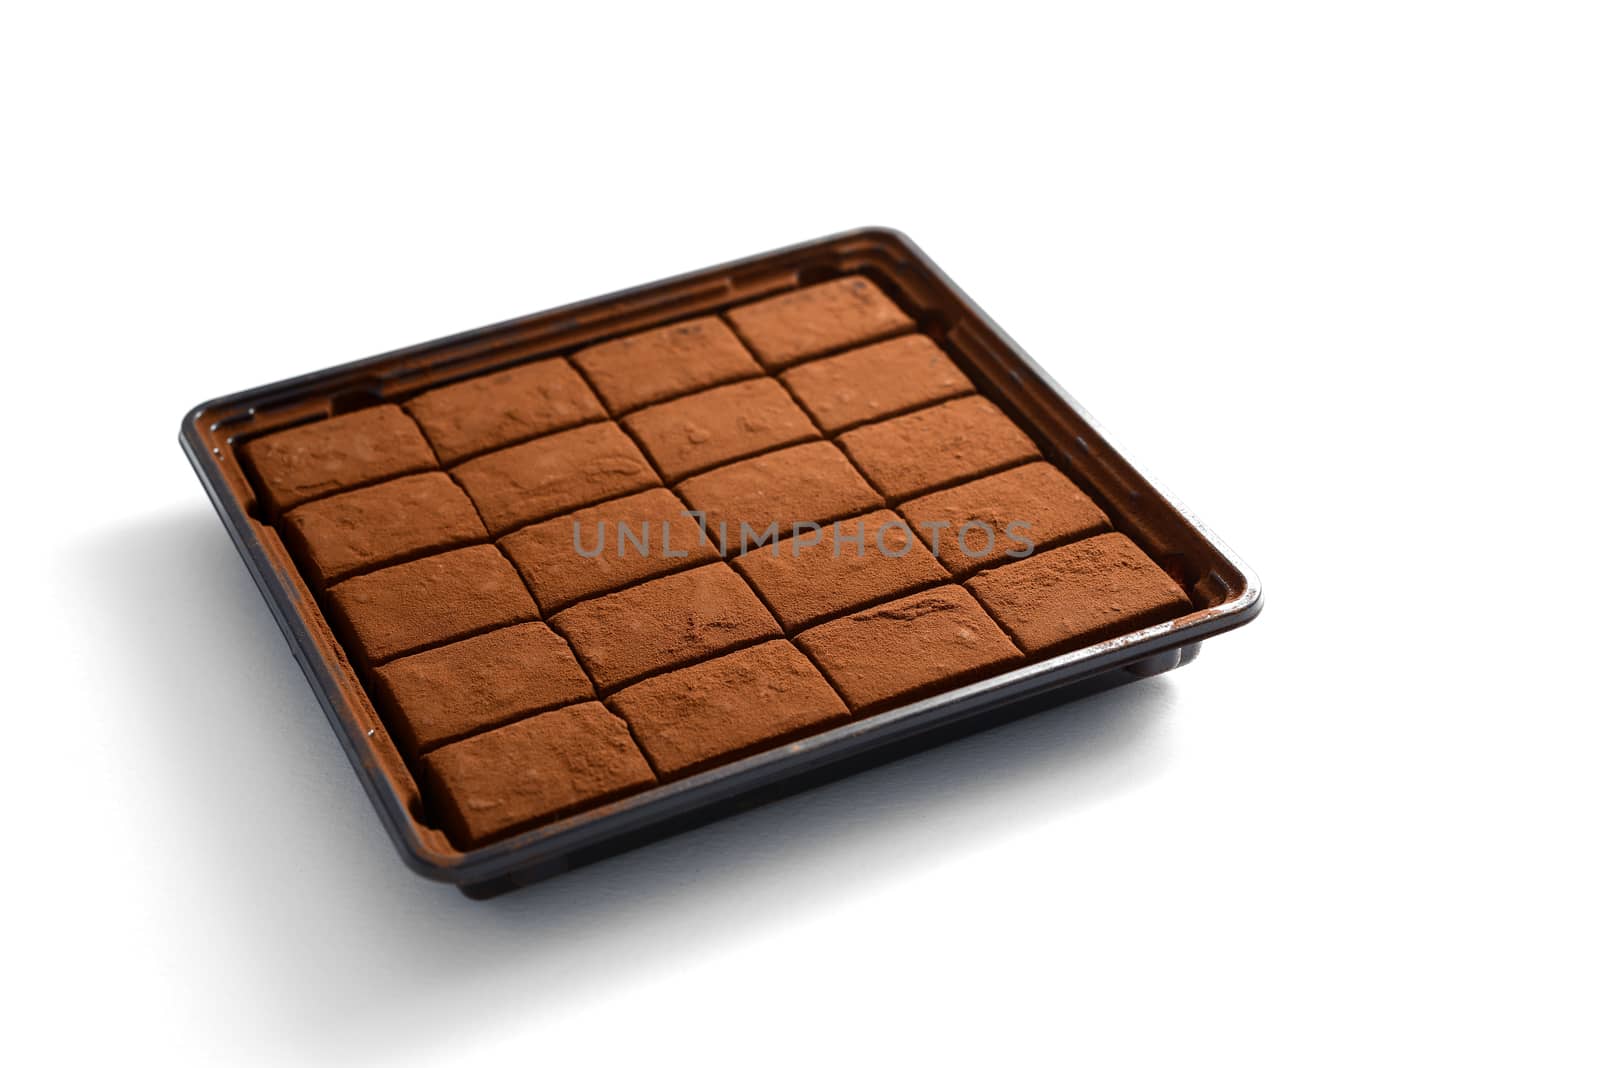 soft chocolate isolated on white